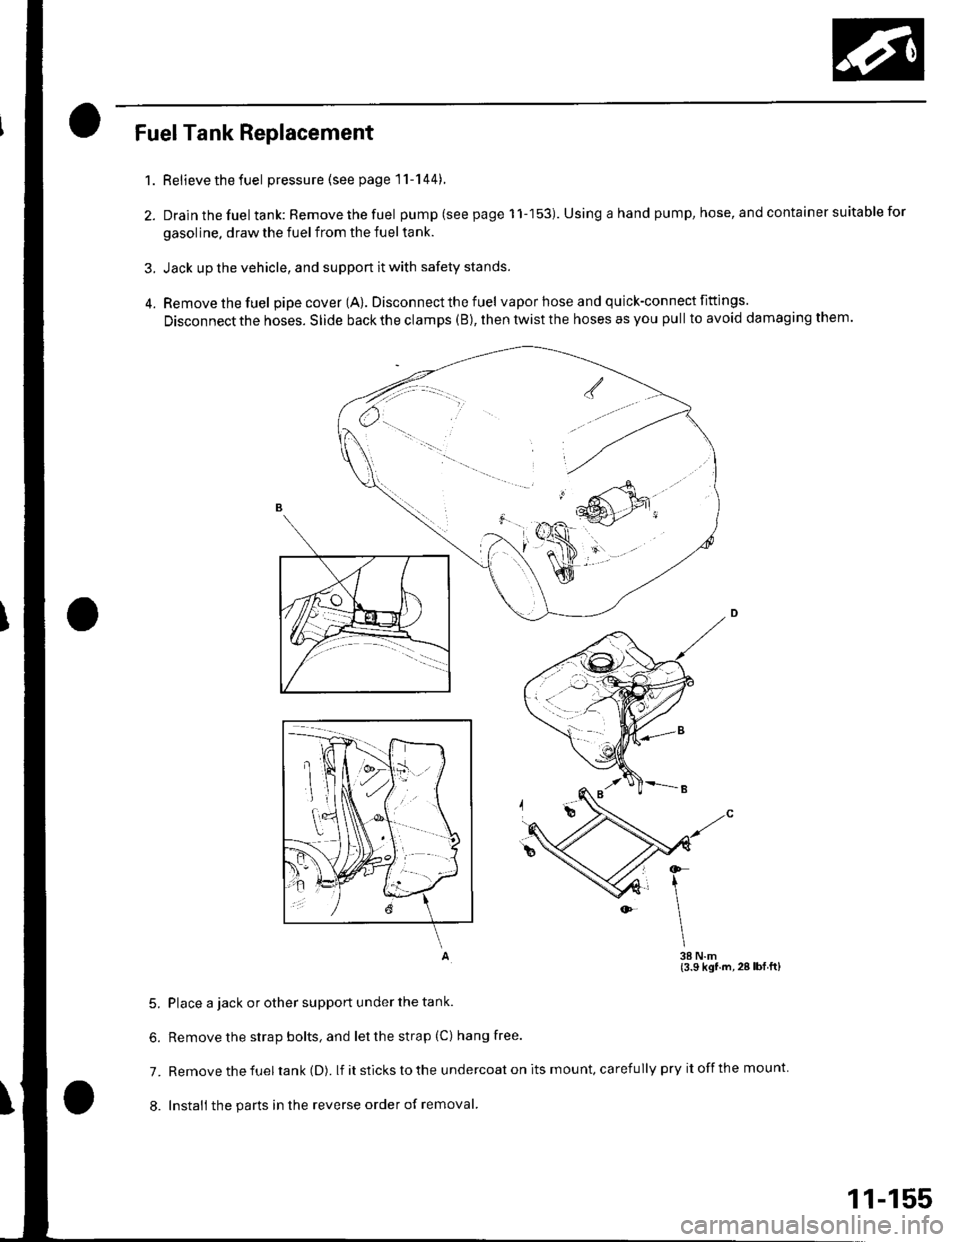 HONDA CIVIC 2003 7.G Workshop Manual Fuel Tank Replacement
Relievethefuel pressure (see page 11-144).
Drain the fuel tank: Remove the fuel pump (see page 1 1-153). Using a hand pump, hose, and container suitable for
gasoline. draw the fu